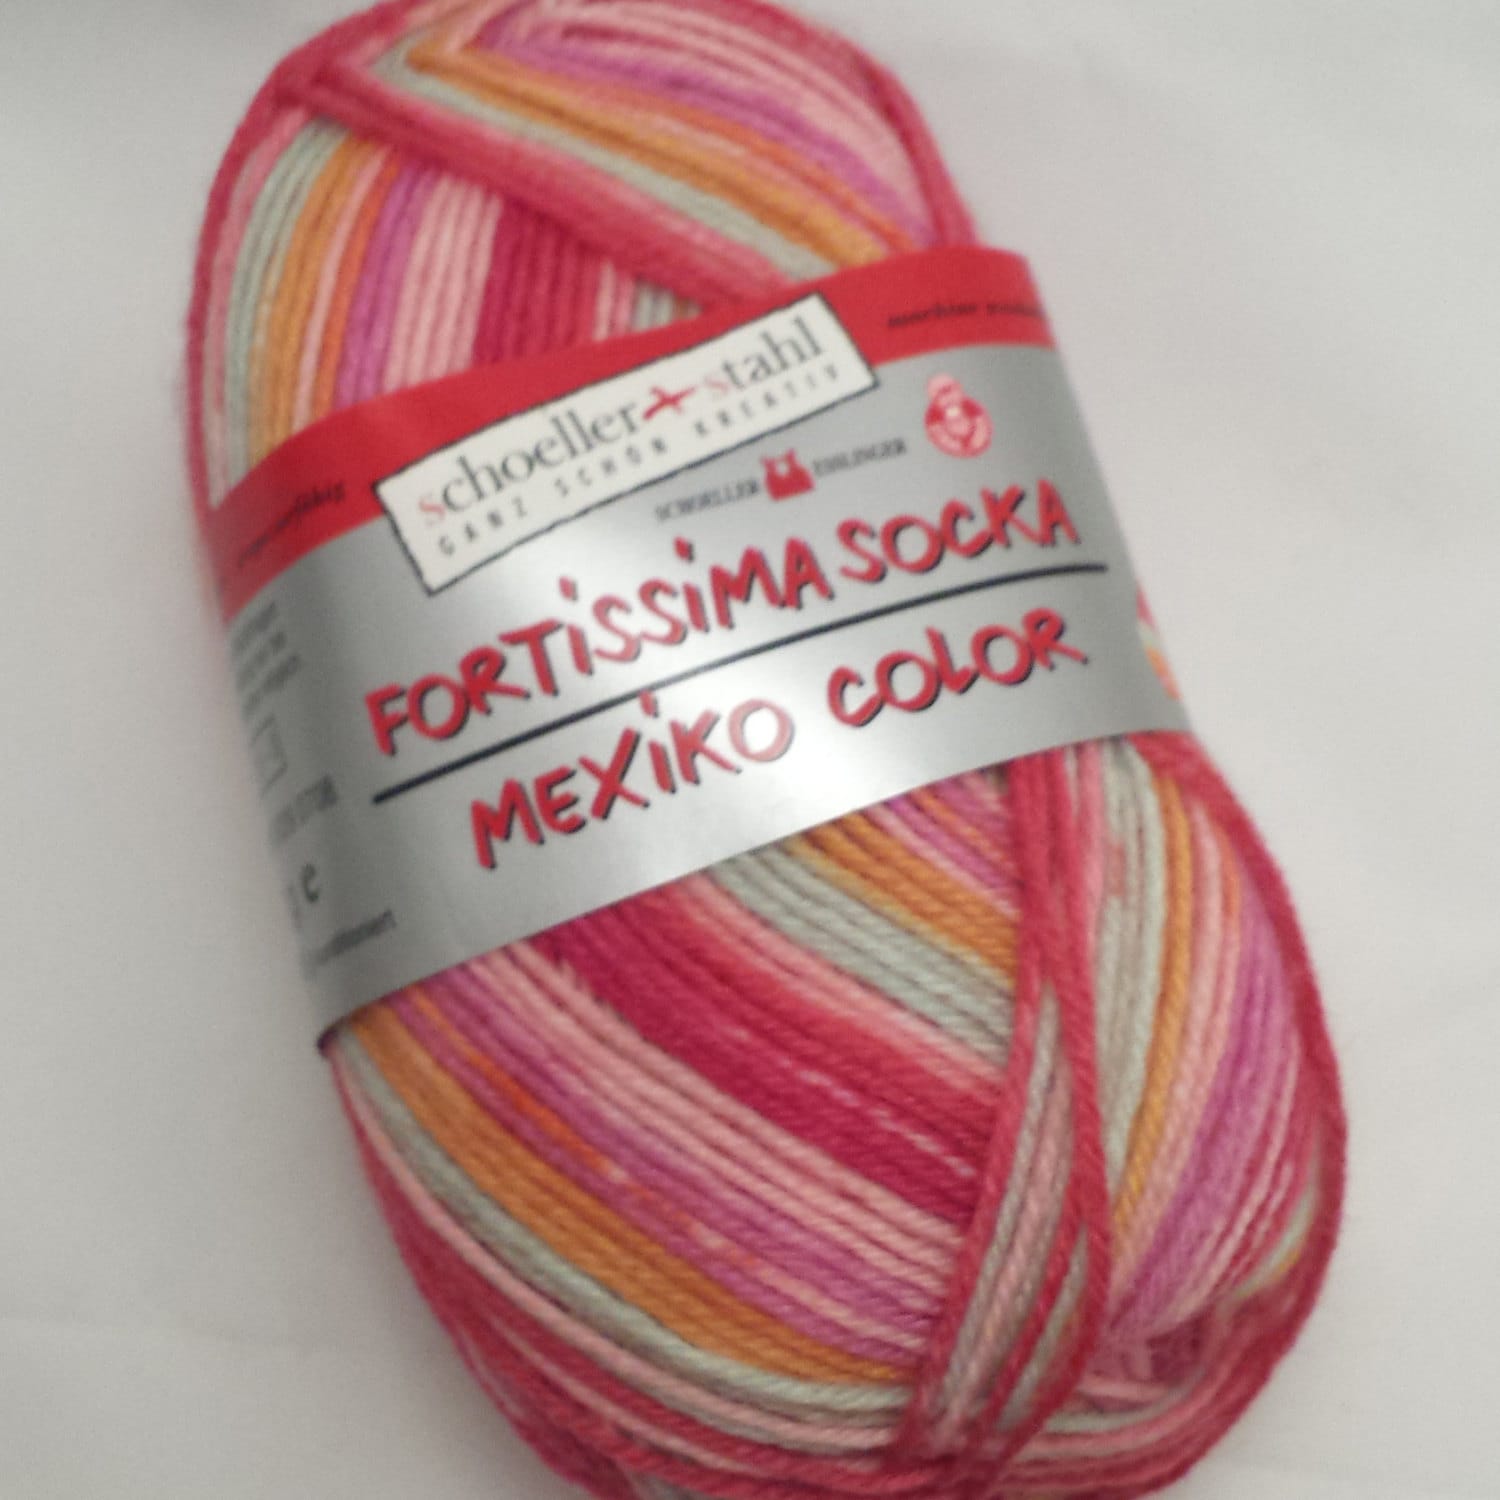 Sock Yarn - Self Patterning. 50g ball of Schoeller and Stahl Fortissima Socka Mexiko Kids Color 038. FREE sock pattern. Wool Polyamide mix